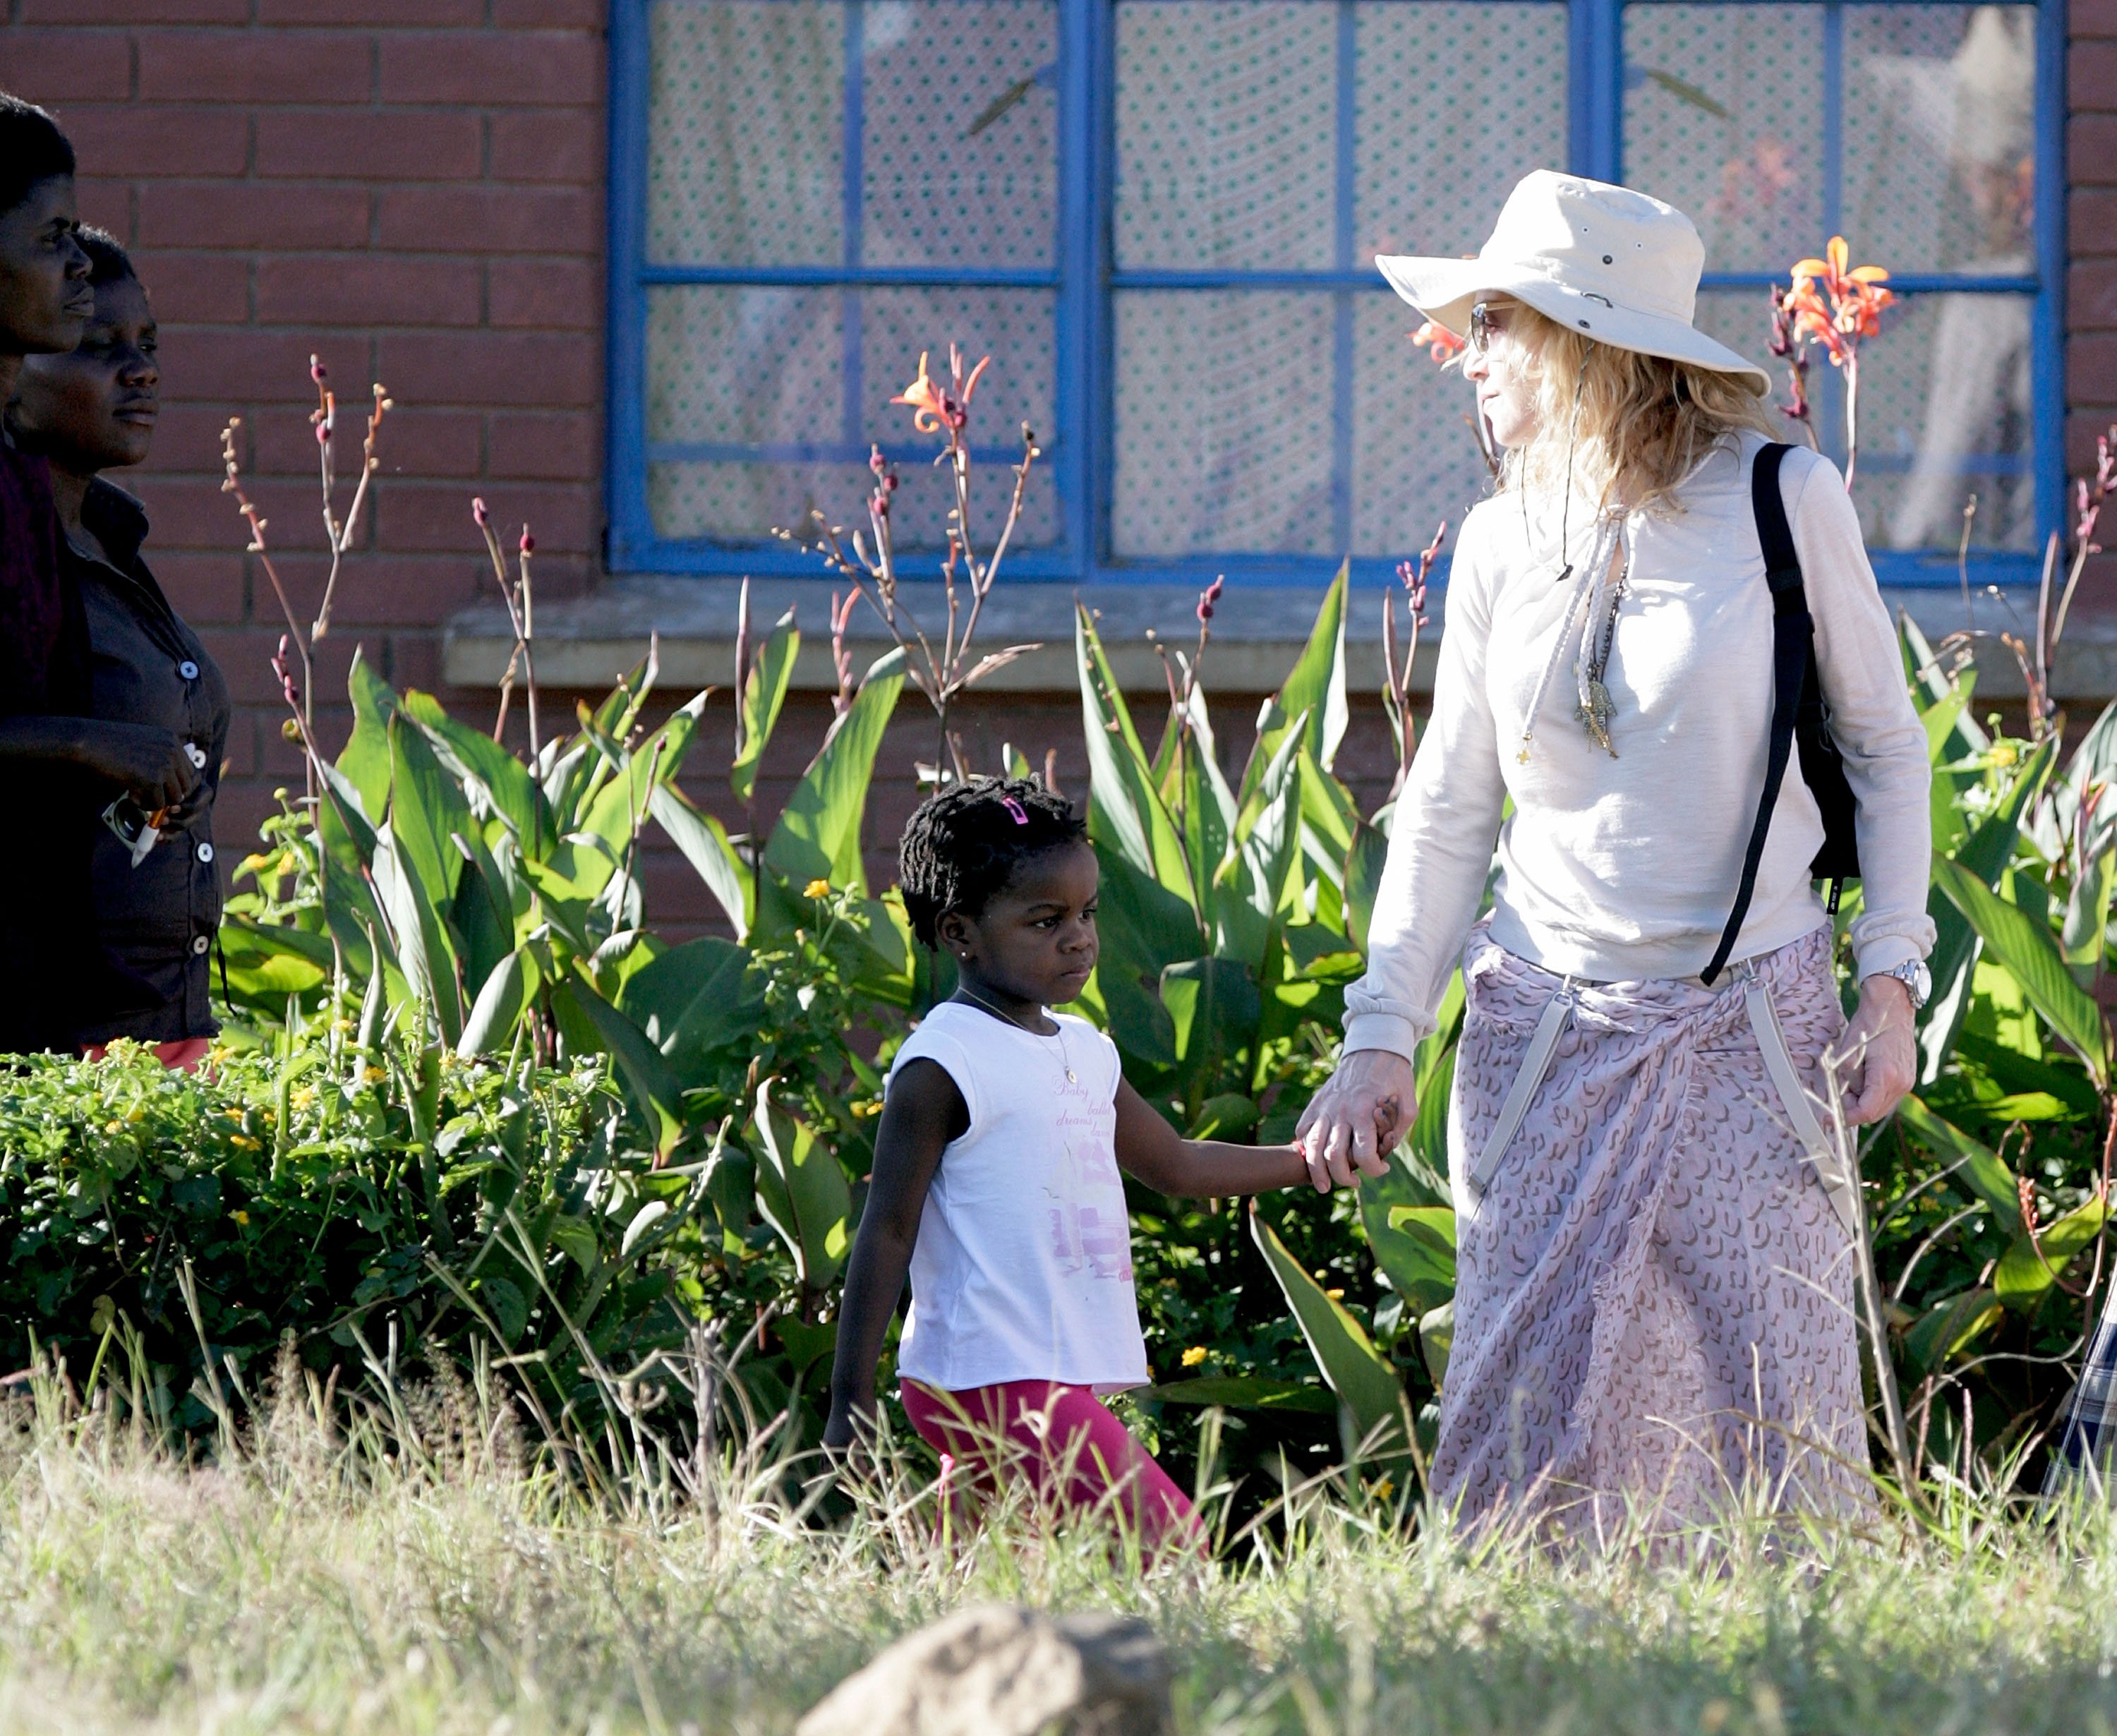 Madonna with daughter Mercy James at a Raising Malawai initiative in Lilongwe, Malawi on April 8, 2010 | Photo: Getty Images